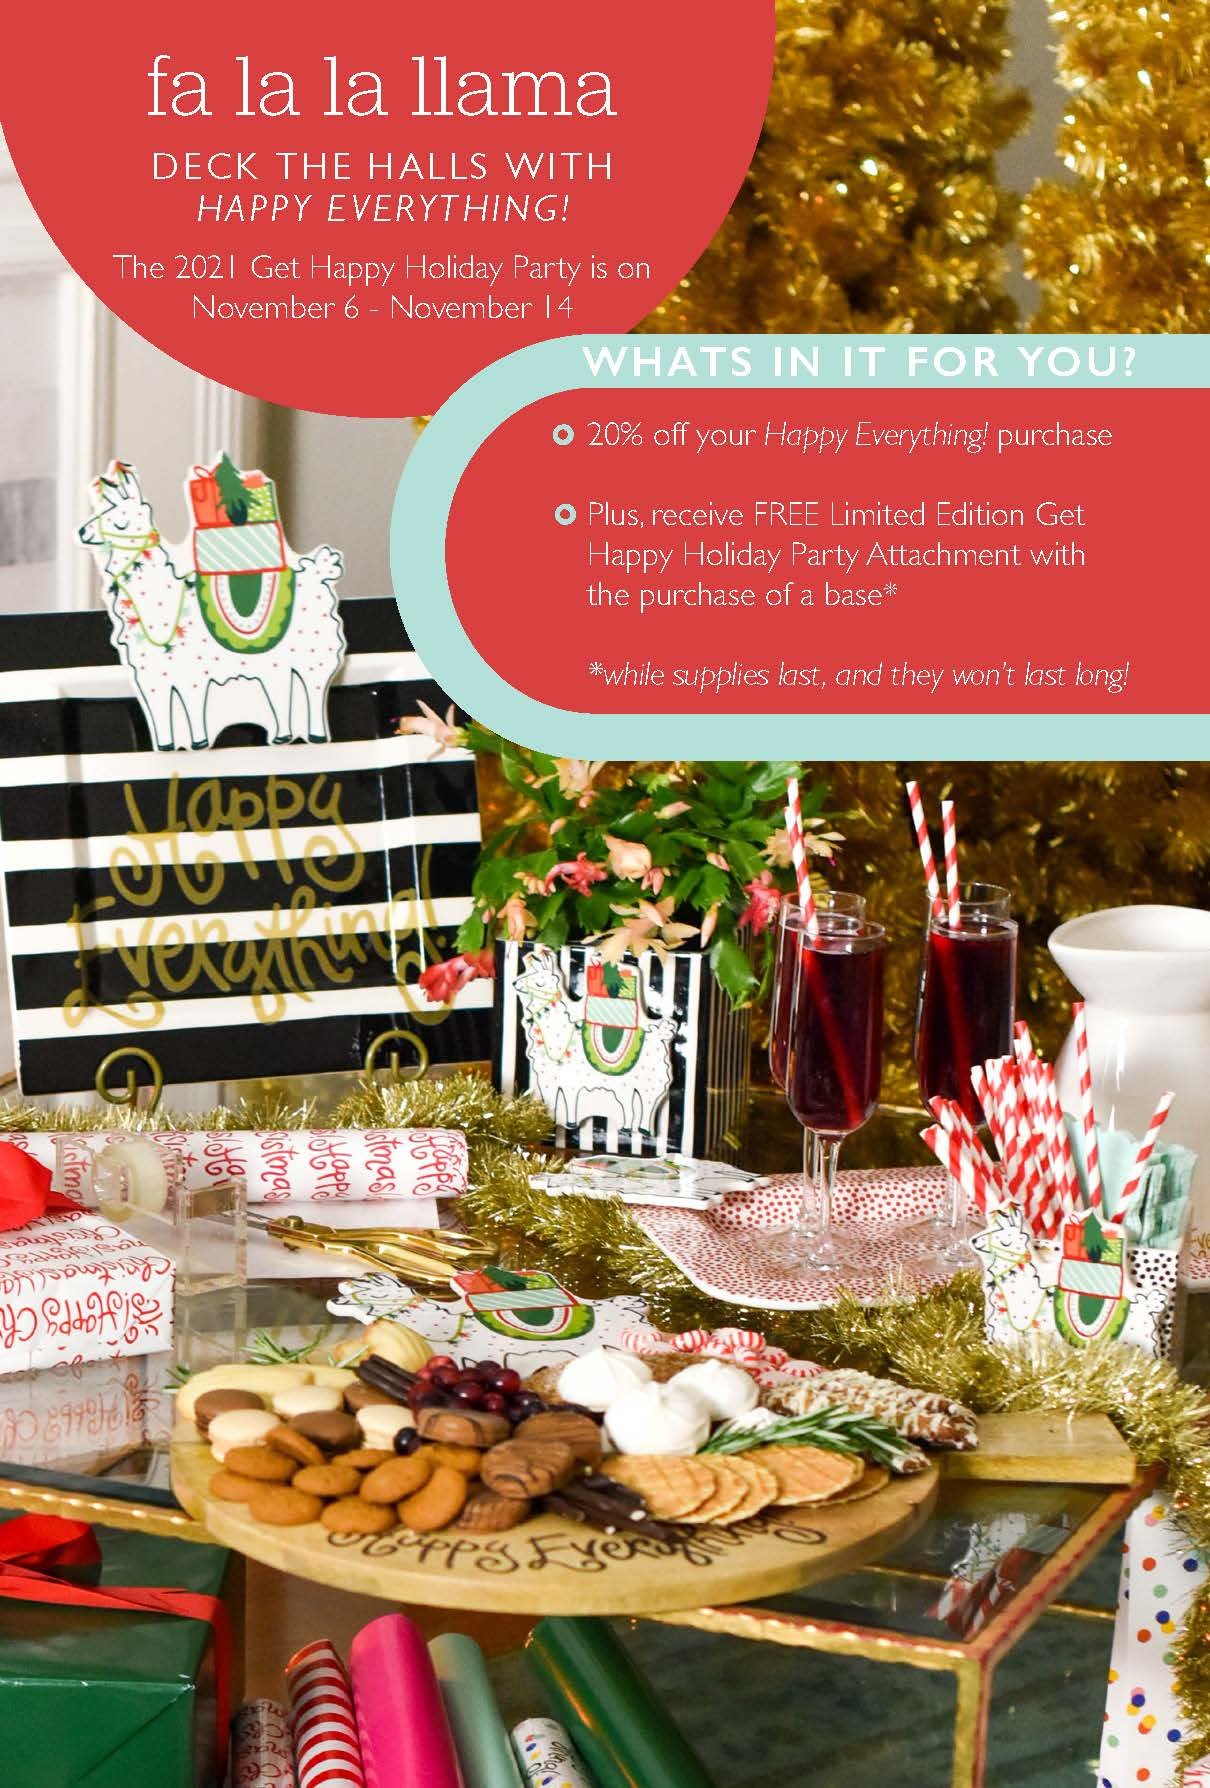 2021 - CAM - END_HEV-Signage_Get Happy Holiday Party_Promotion Details_4x6.jpg